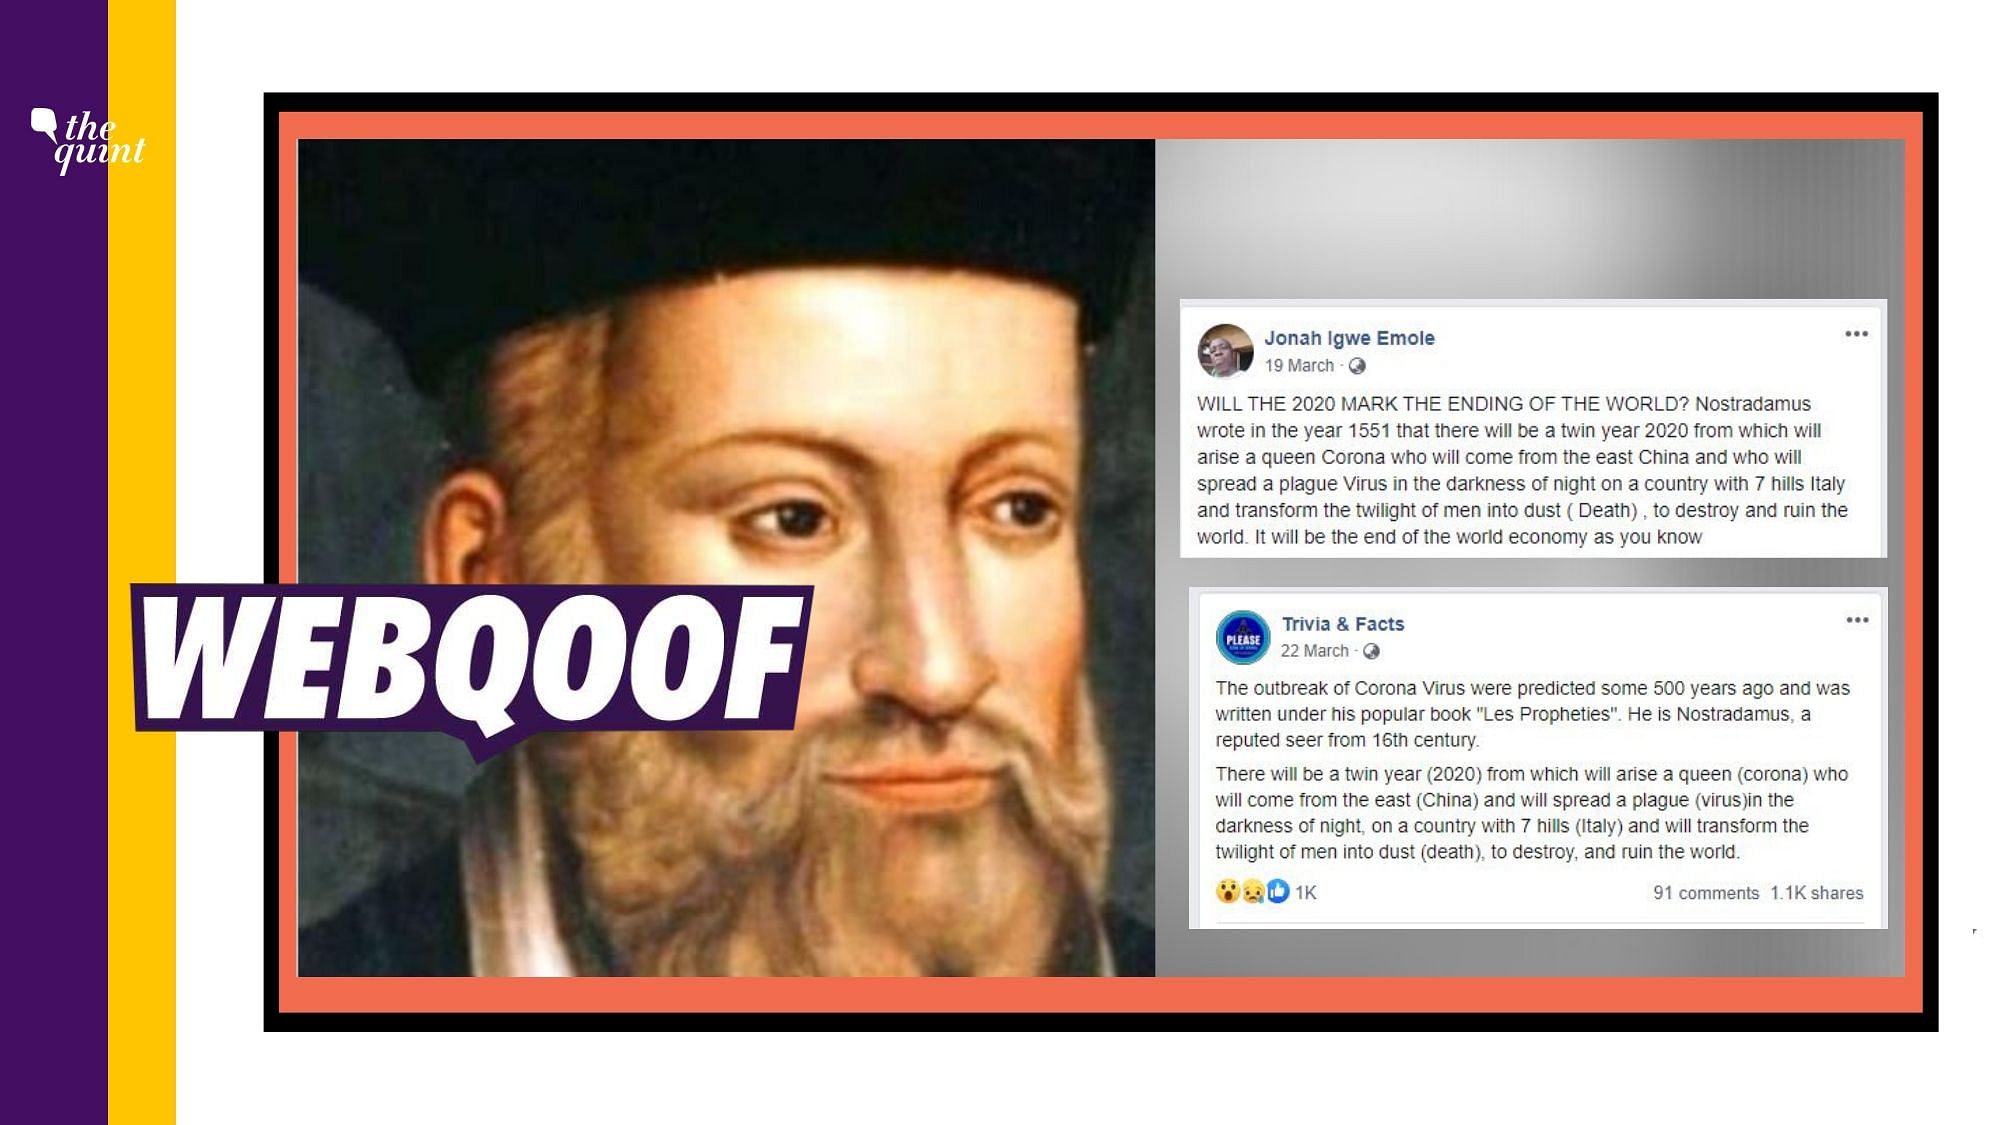 Several users on social media are claiming that the 16th century French astrologer Nostradamus predicted coronavirus in his book <i>‘Les Propheties’</i>.